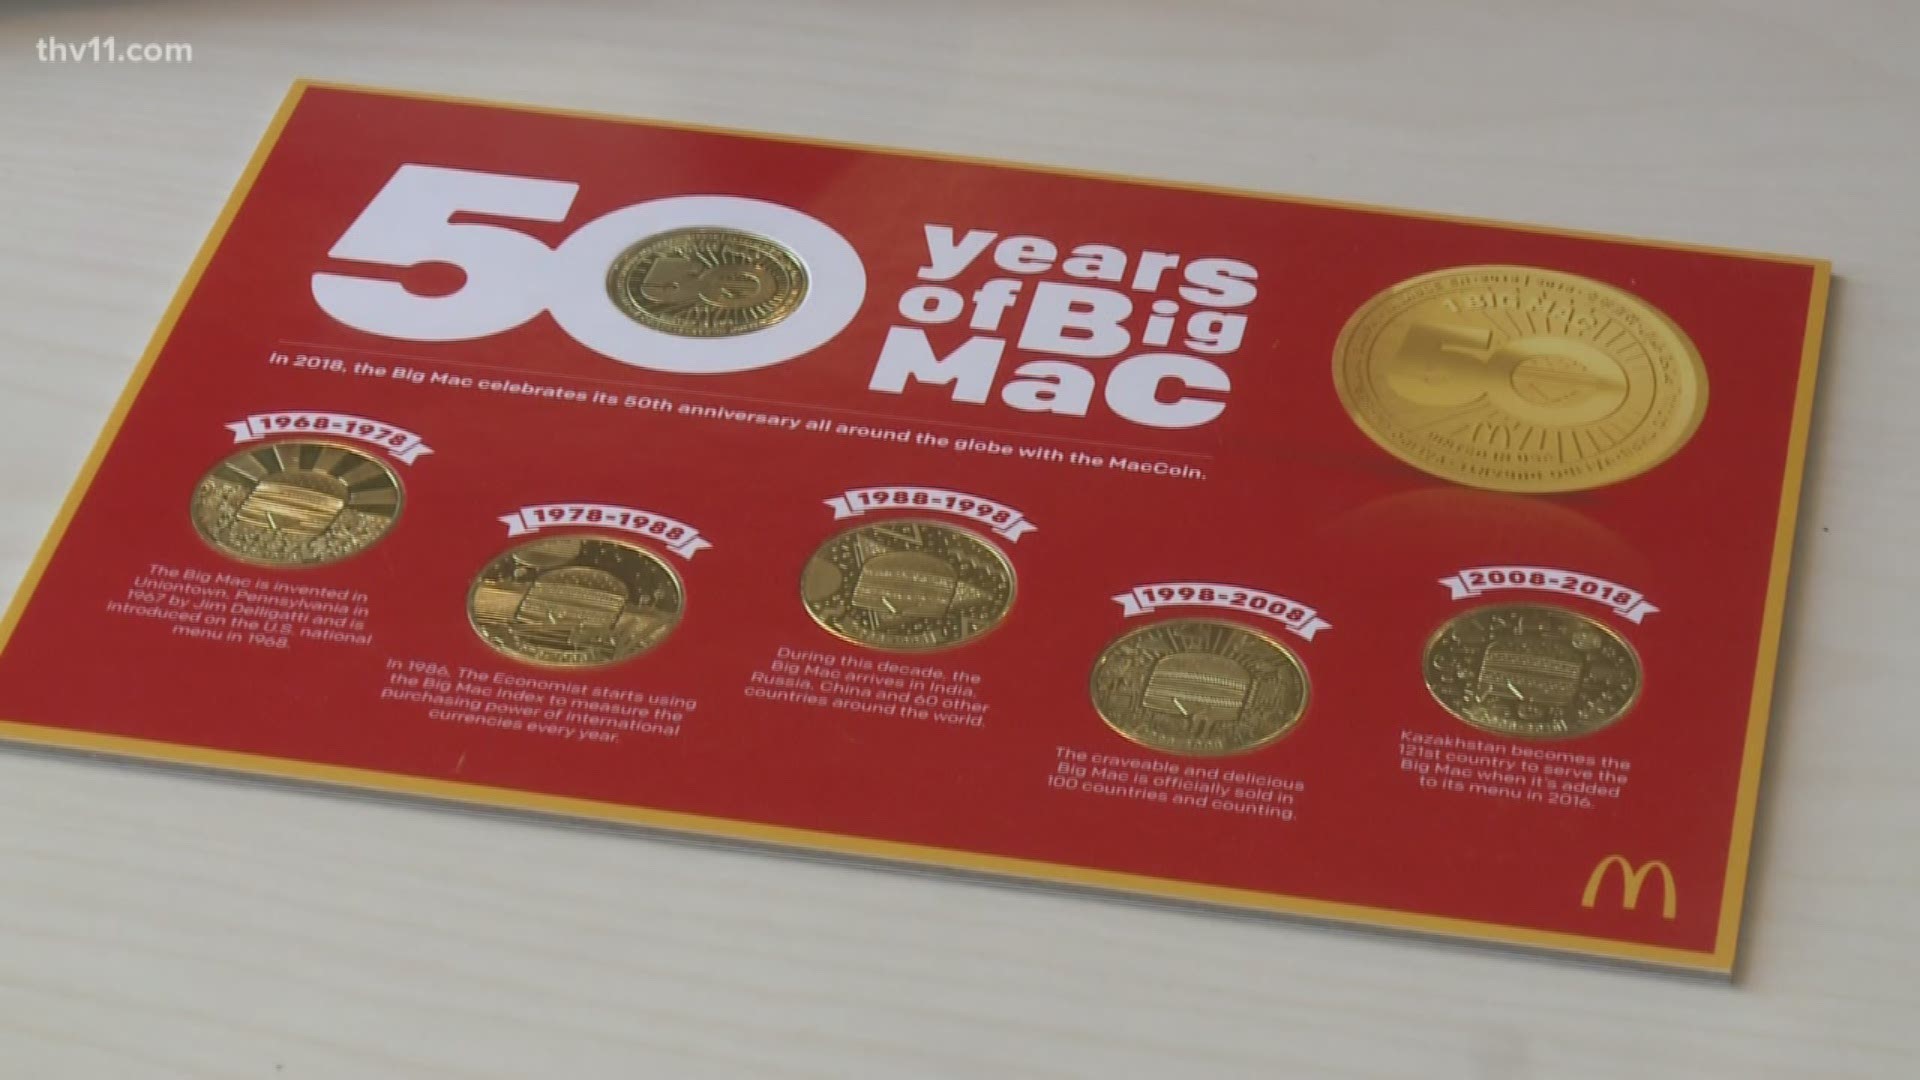 It's been 50 years since the first Big Mac was served to a customer and the company is celebrating that special accomplishment in a special way.